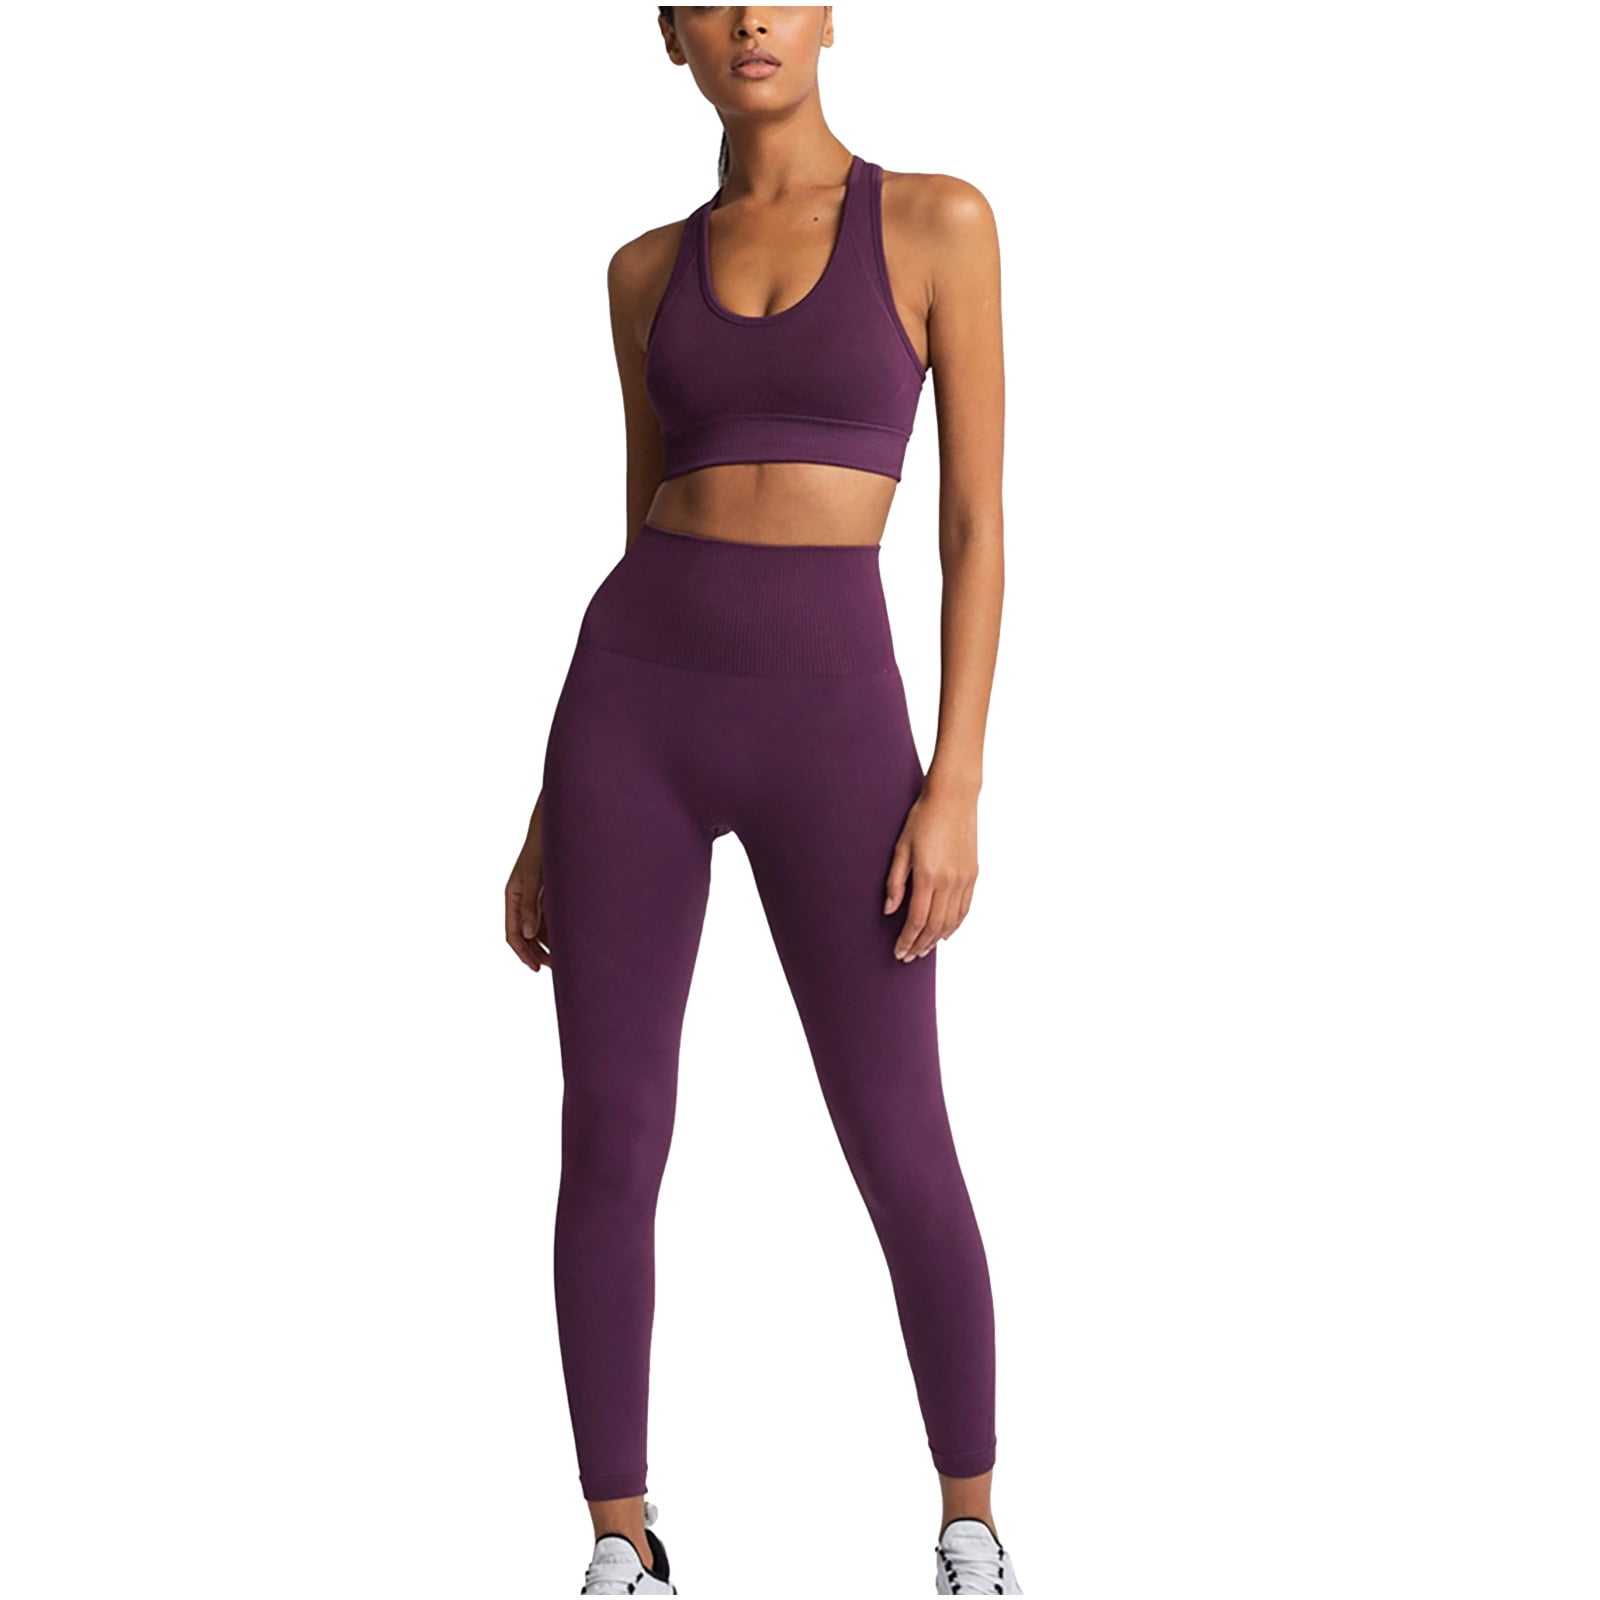 Women's Fashionable Sports Bra And Leggings Set And Bare Sensation Tights  Set for Women